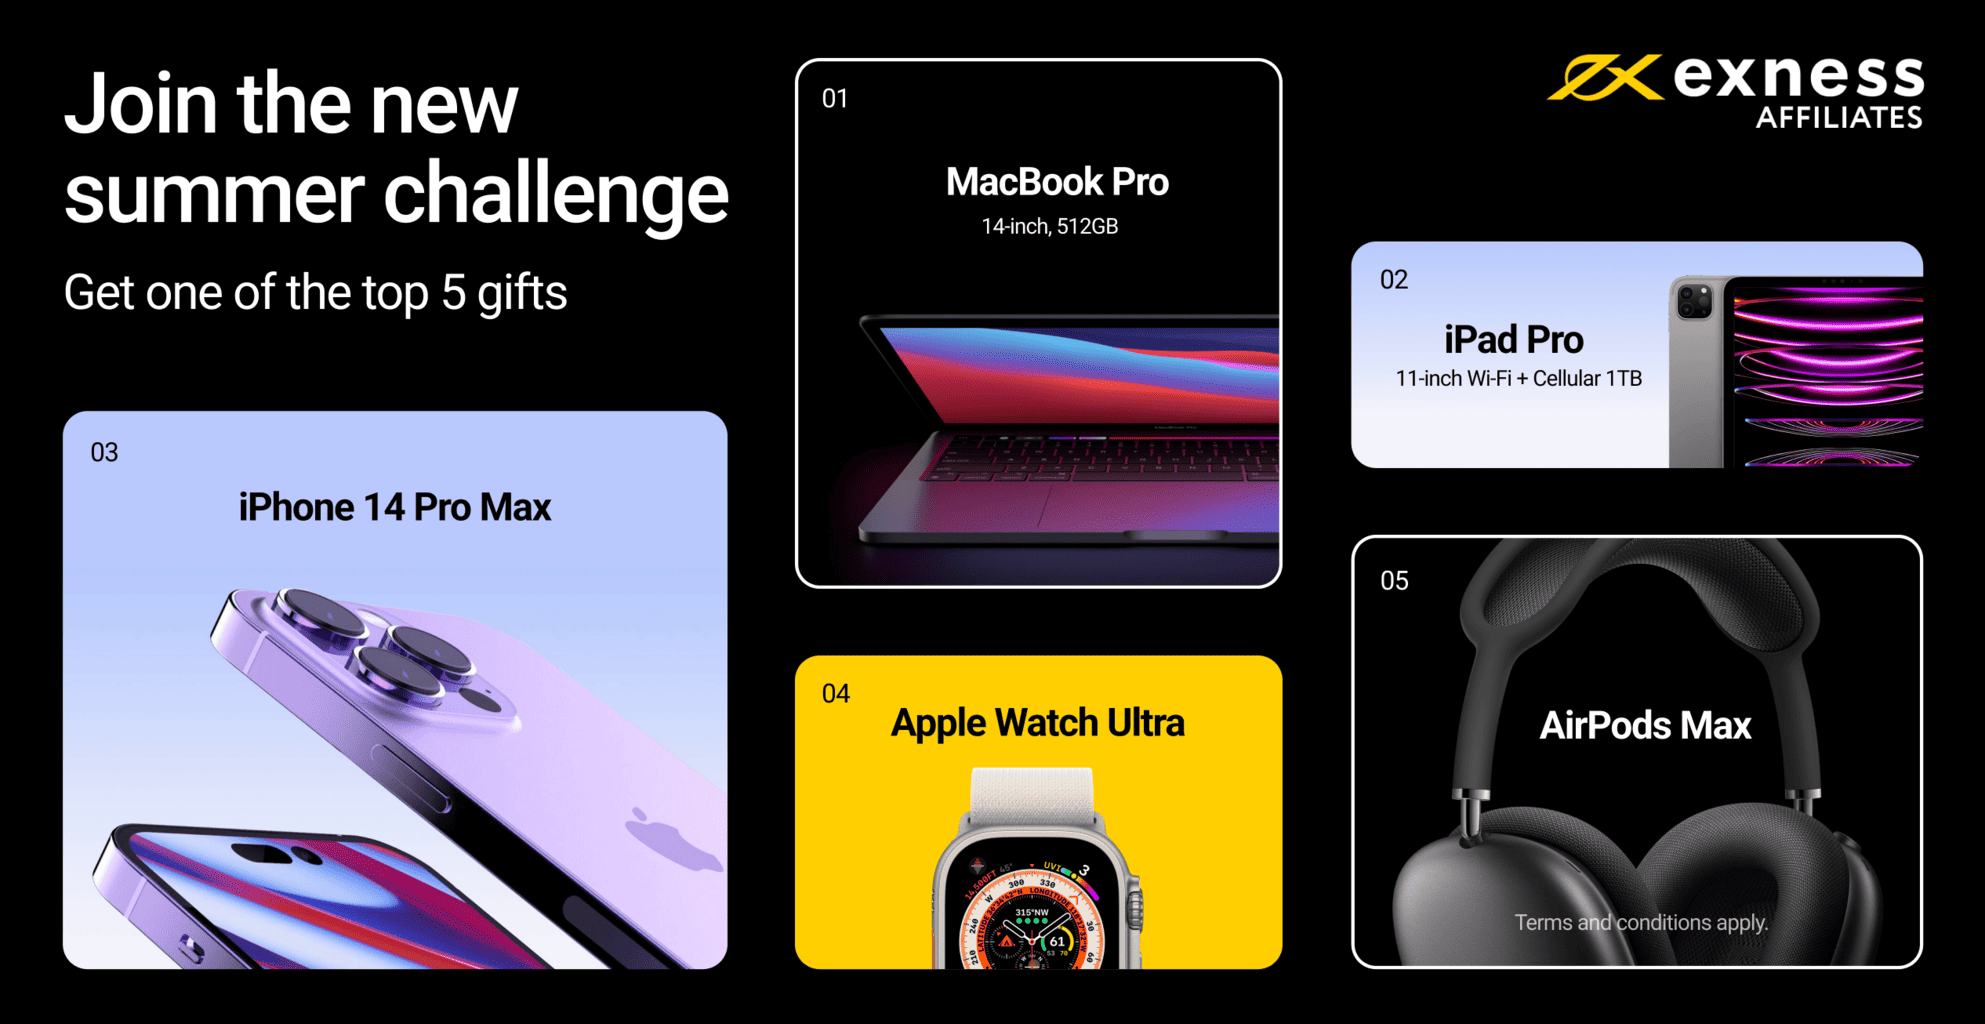 Exness Affiliates launches thrilling 2023 summer challenge with tech gifts